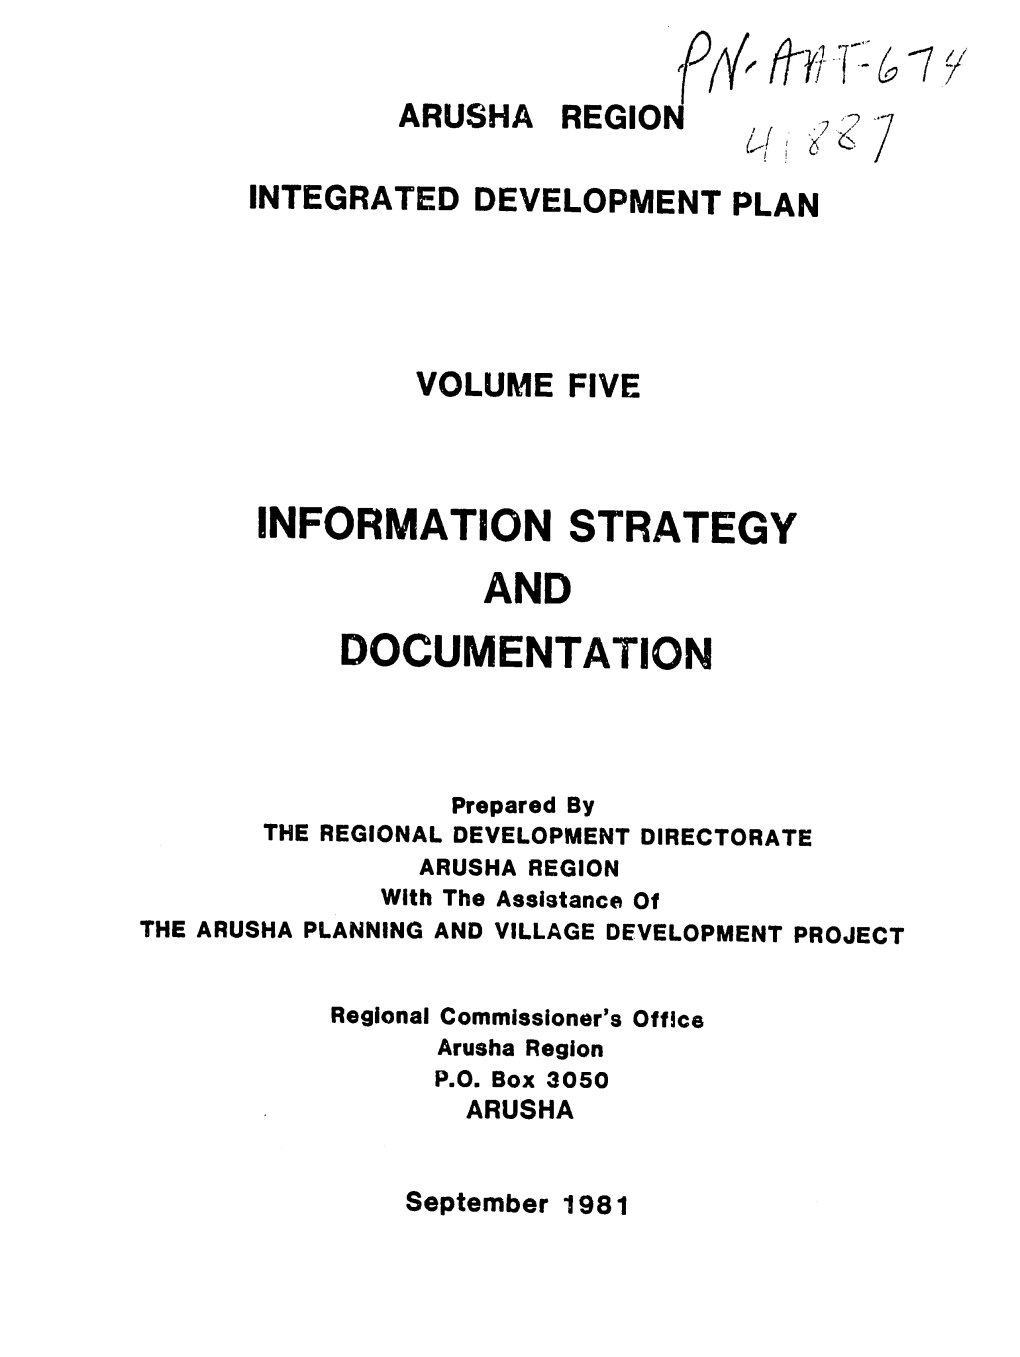 Information Strategy and Documentation